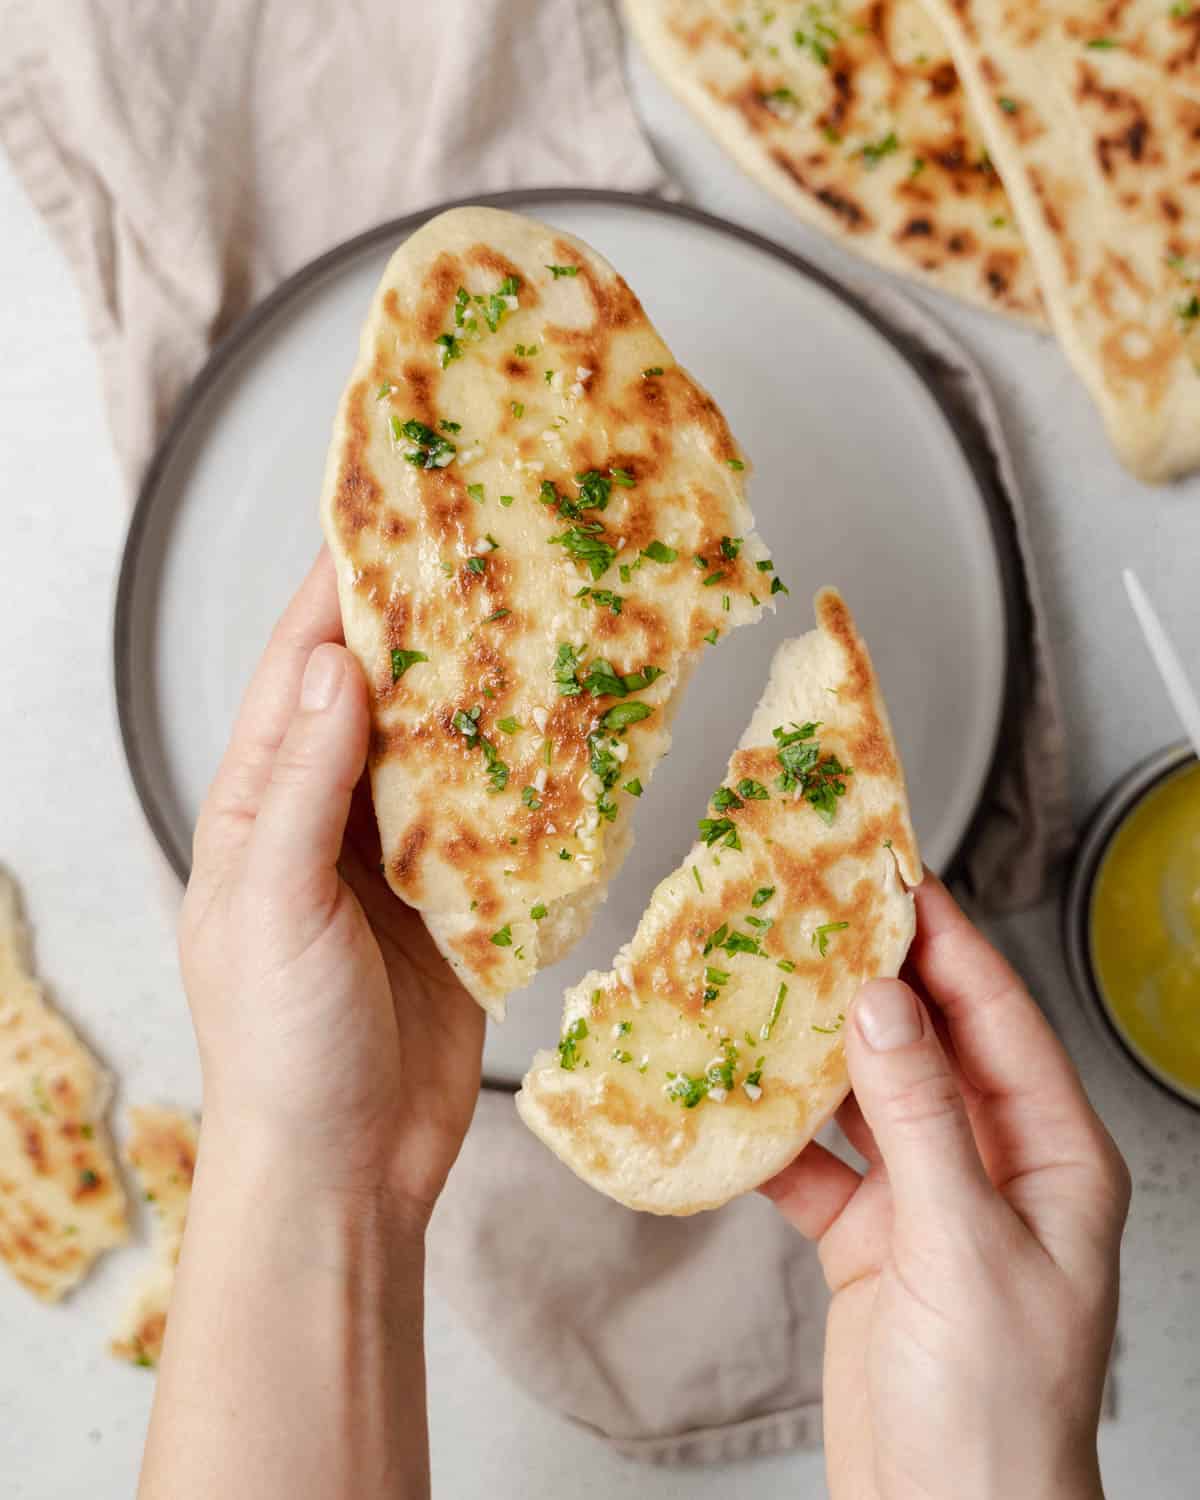 Hand holding two halves of naan bread.